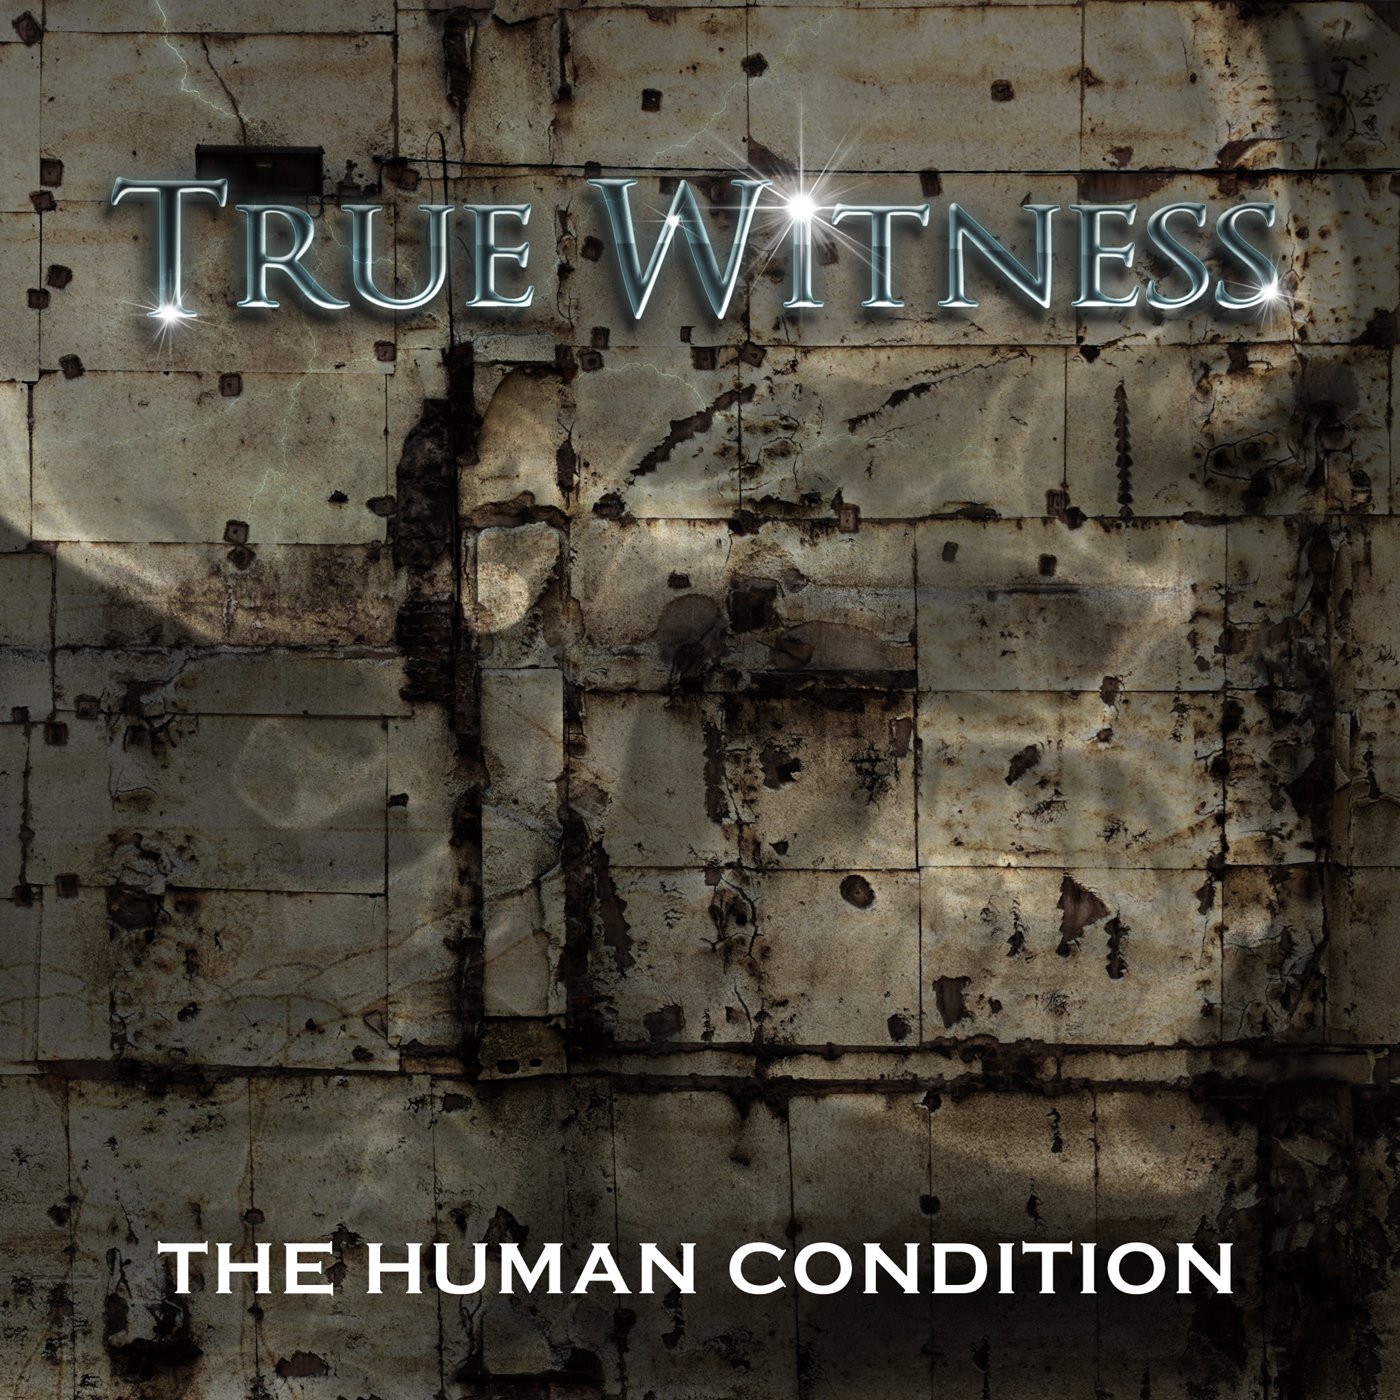 The Human Condition by True Witness